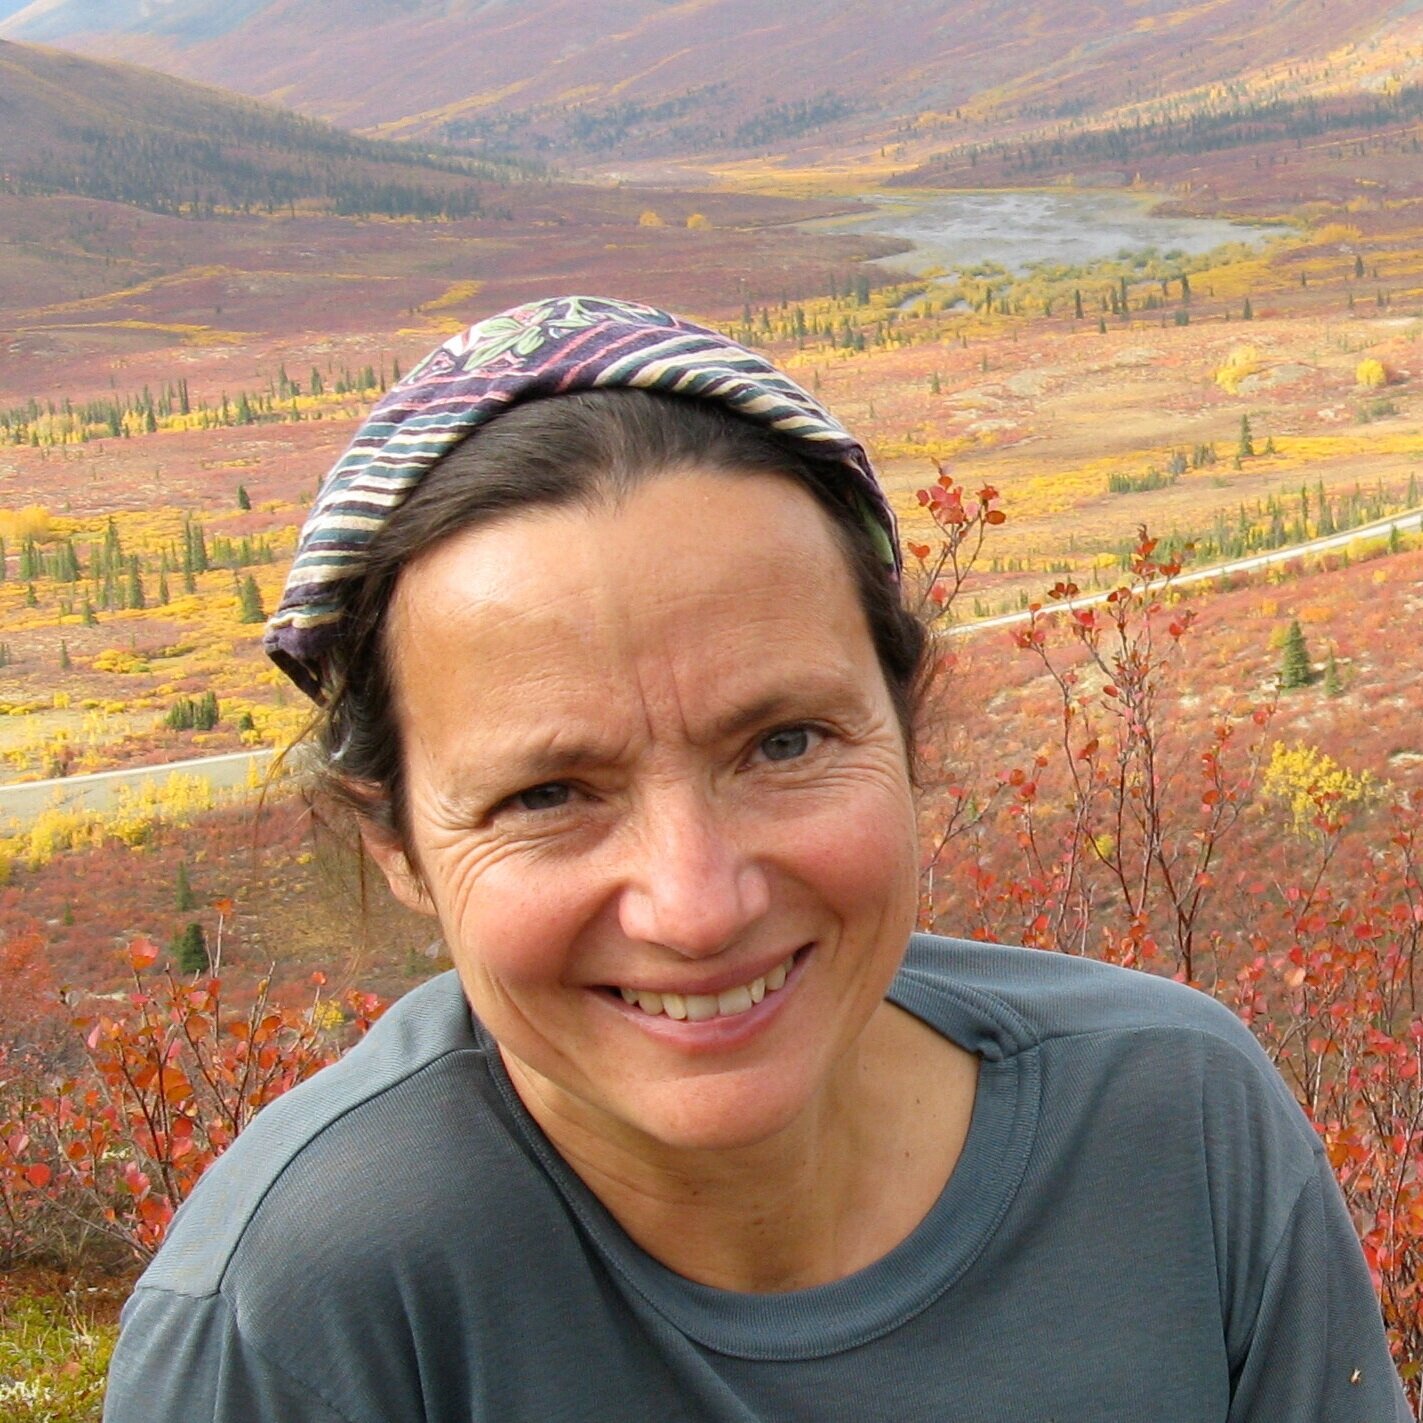  - Suzanne Crocker made a name for herself with her first feature POV documentary All The Time In The World for its authentic, intimate and humorous style, receiving national and international acclaim.  Winner of 22 Festival Awards from around the world. Suzanne lives with her family in the far North of Canada, 300 km from the Arctic Circle.  She switched careers from rural physician to filmmaker in 2008. Recently, Suzanne turned her camera on her family once again in their latest adventure, First We Eat (FirstWeEat.ca), scheduled for release later this year.